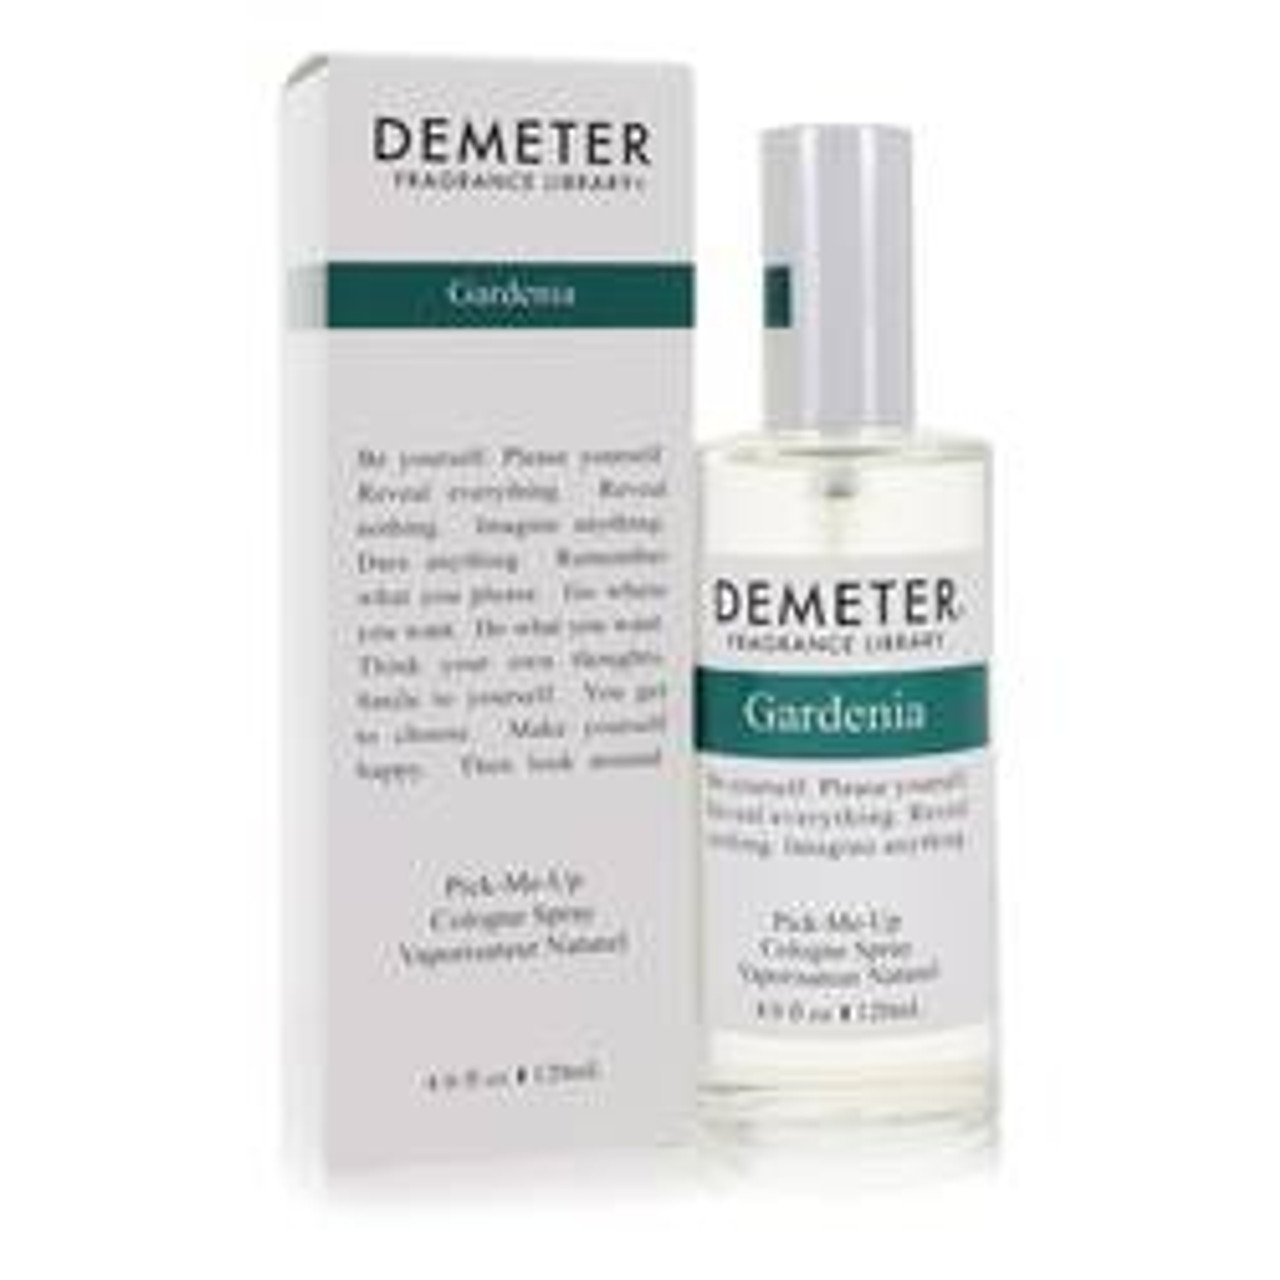 Demeter Gardenia Perfume By Demeter Cologne Spray 4 oz for Women - [From 79.50 - Choose pk Qty ] - *Ships from Miami